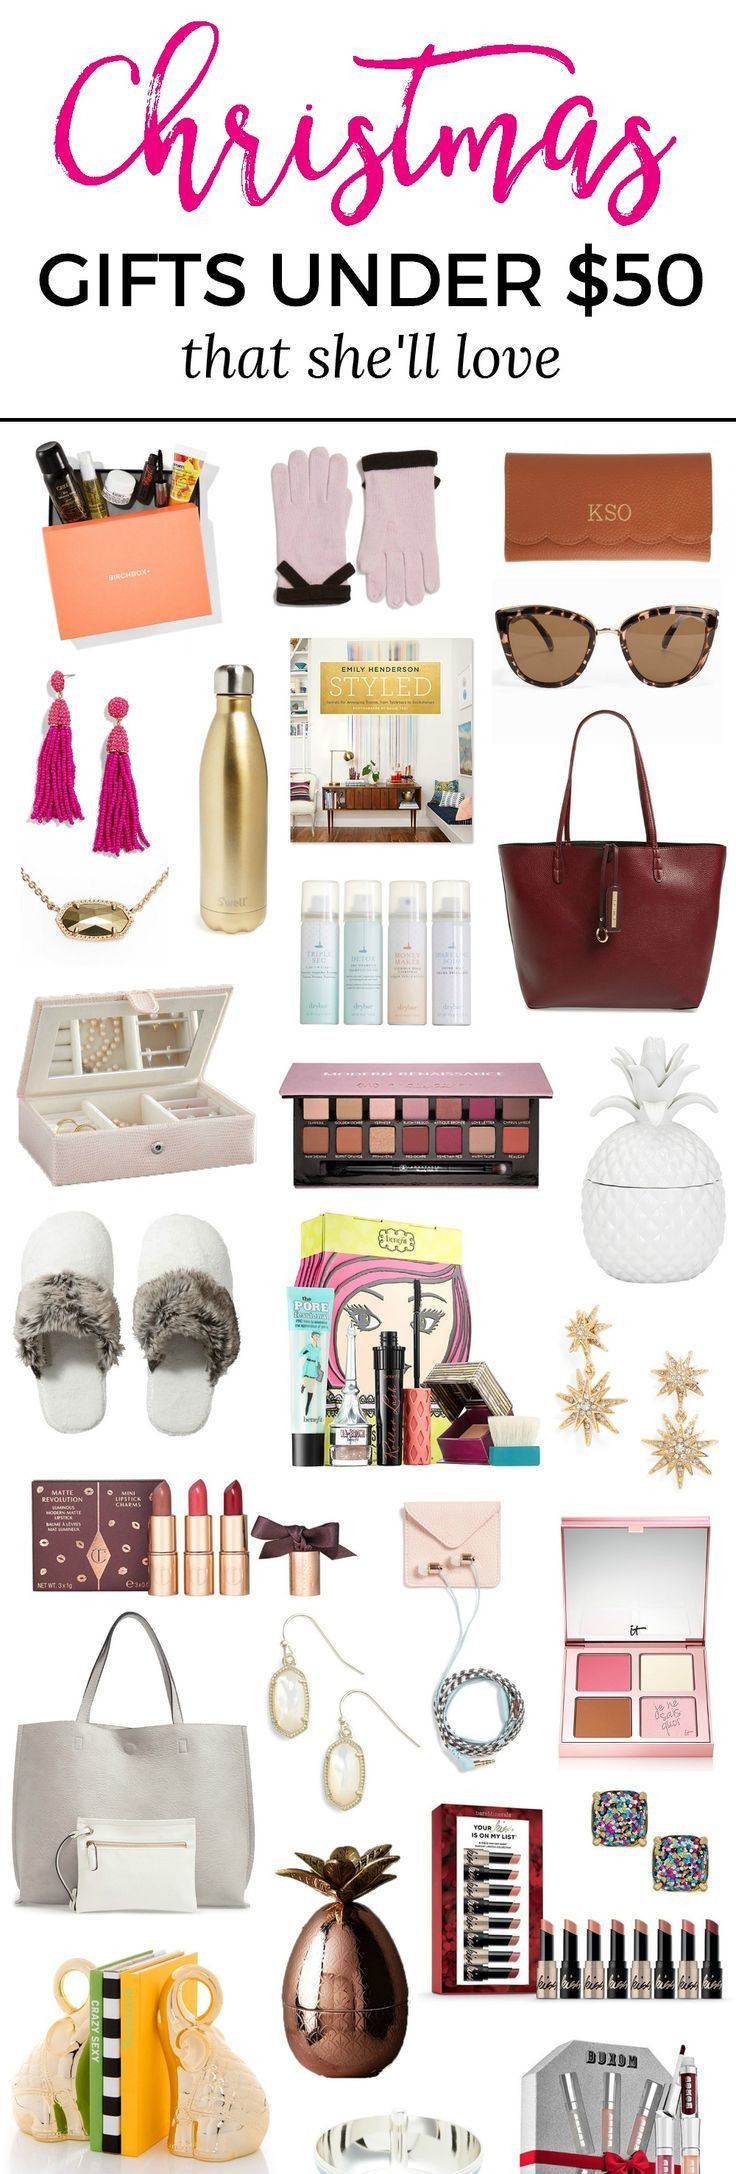 Holiday Gift Ideas For Women
 Best 25 Gifts for women ideas on Pinterest